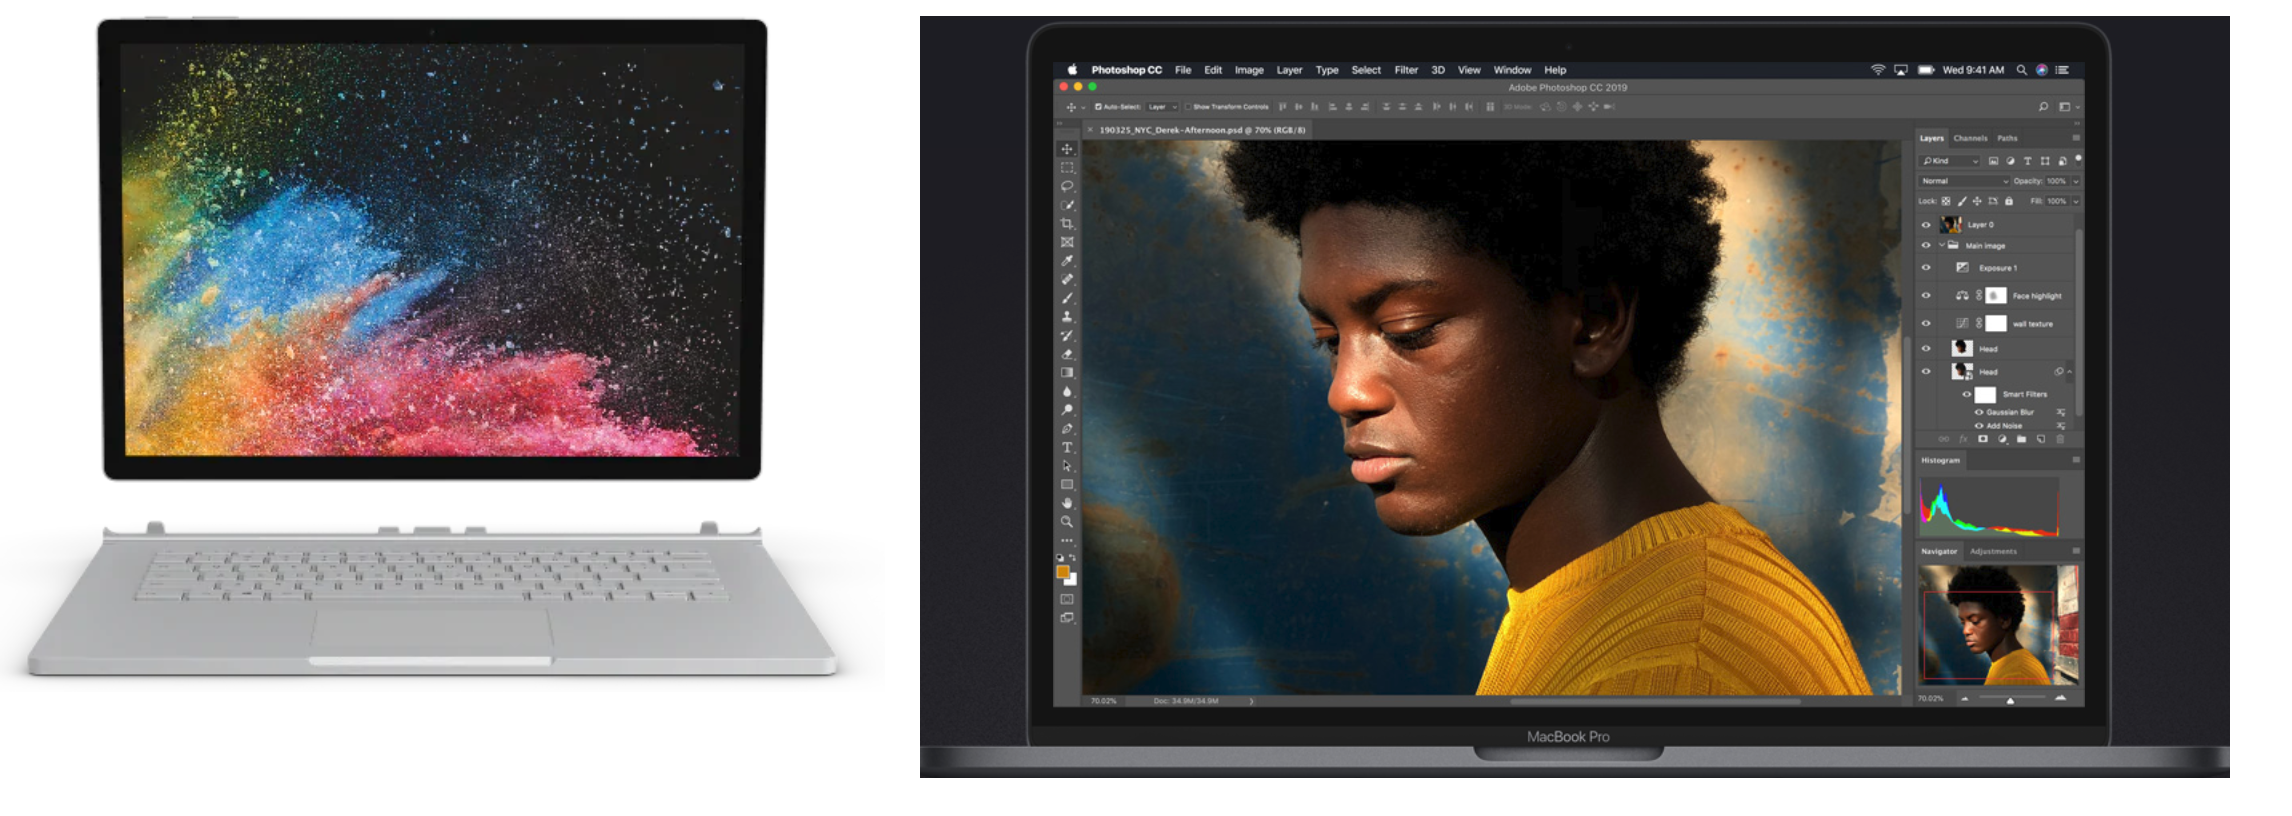 Macbook Pro 2019 May Vs Surface Book 2 By Ajay